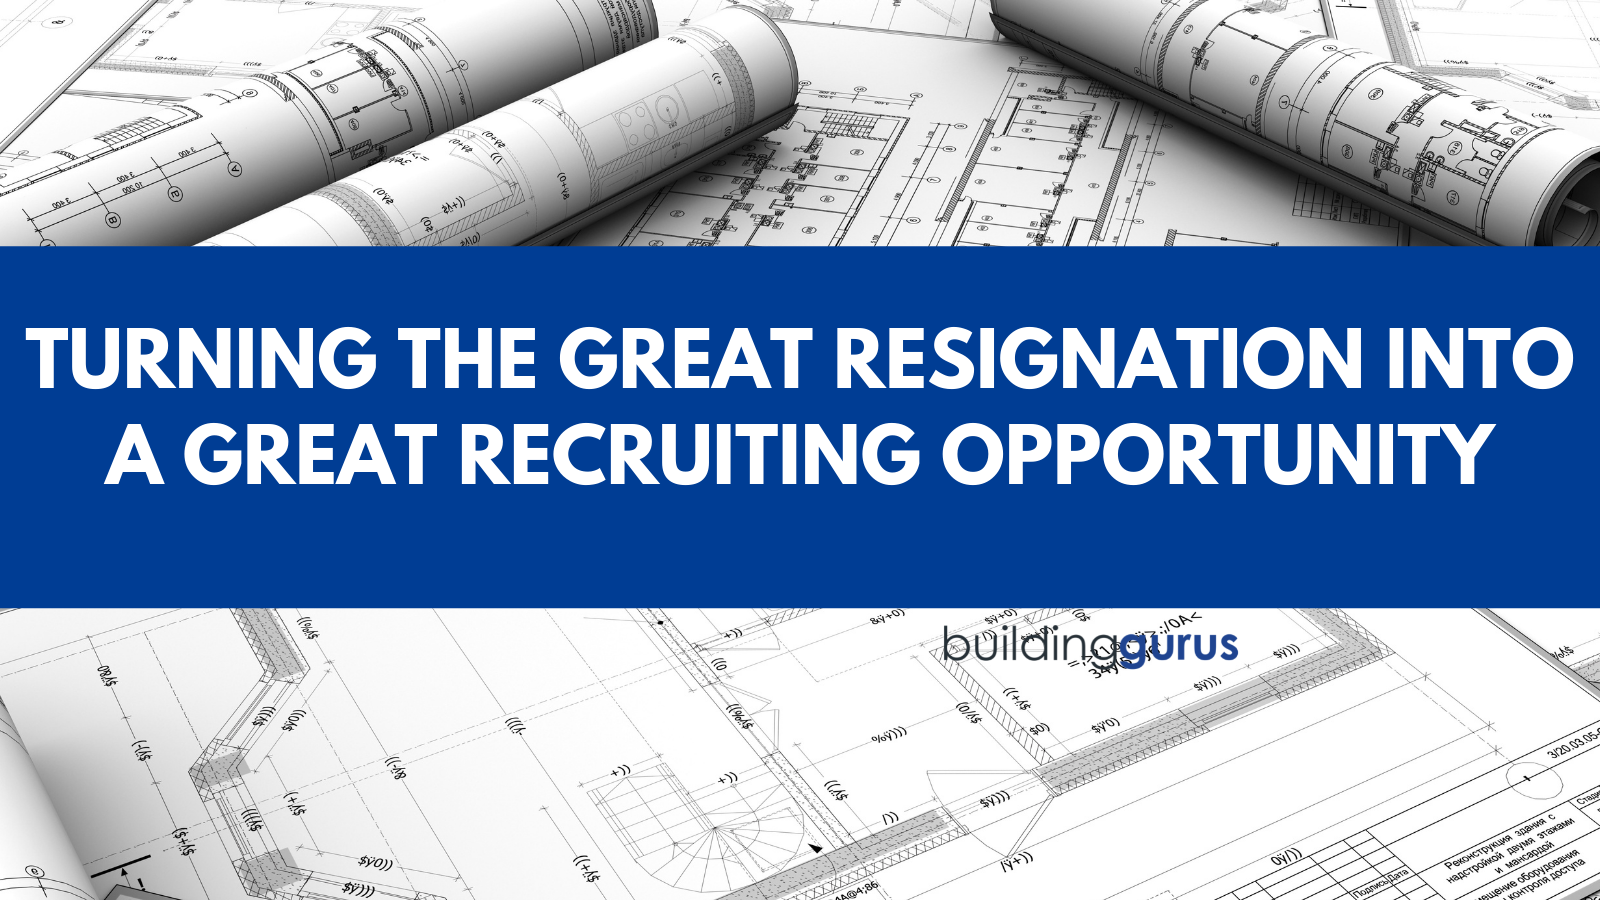 Turning the Great Resignation into a Great Recruiting Opportunity